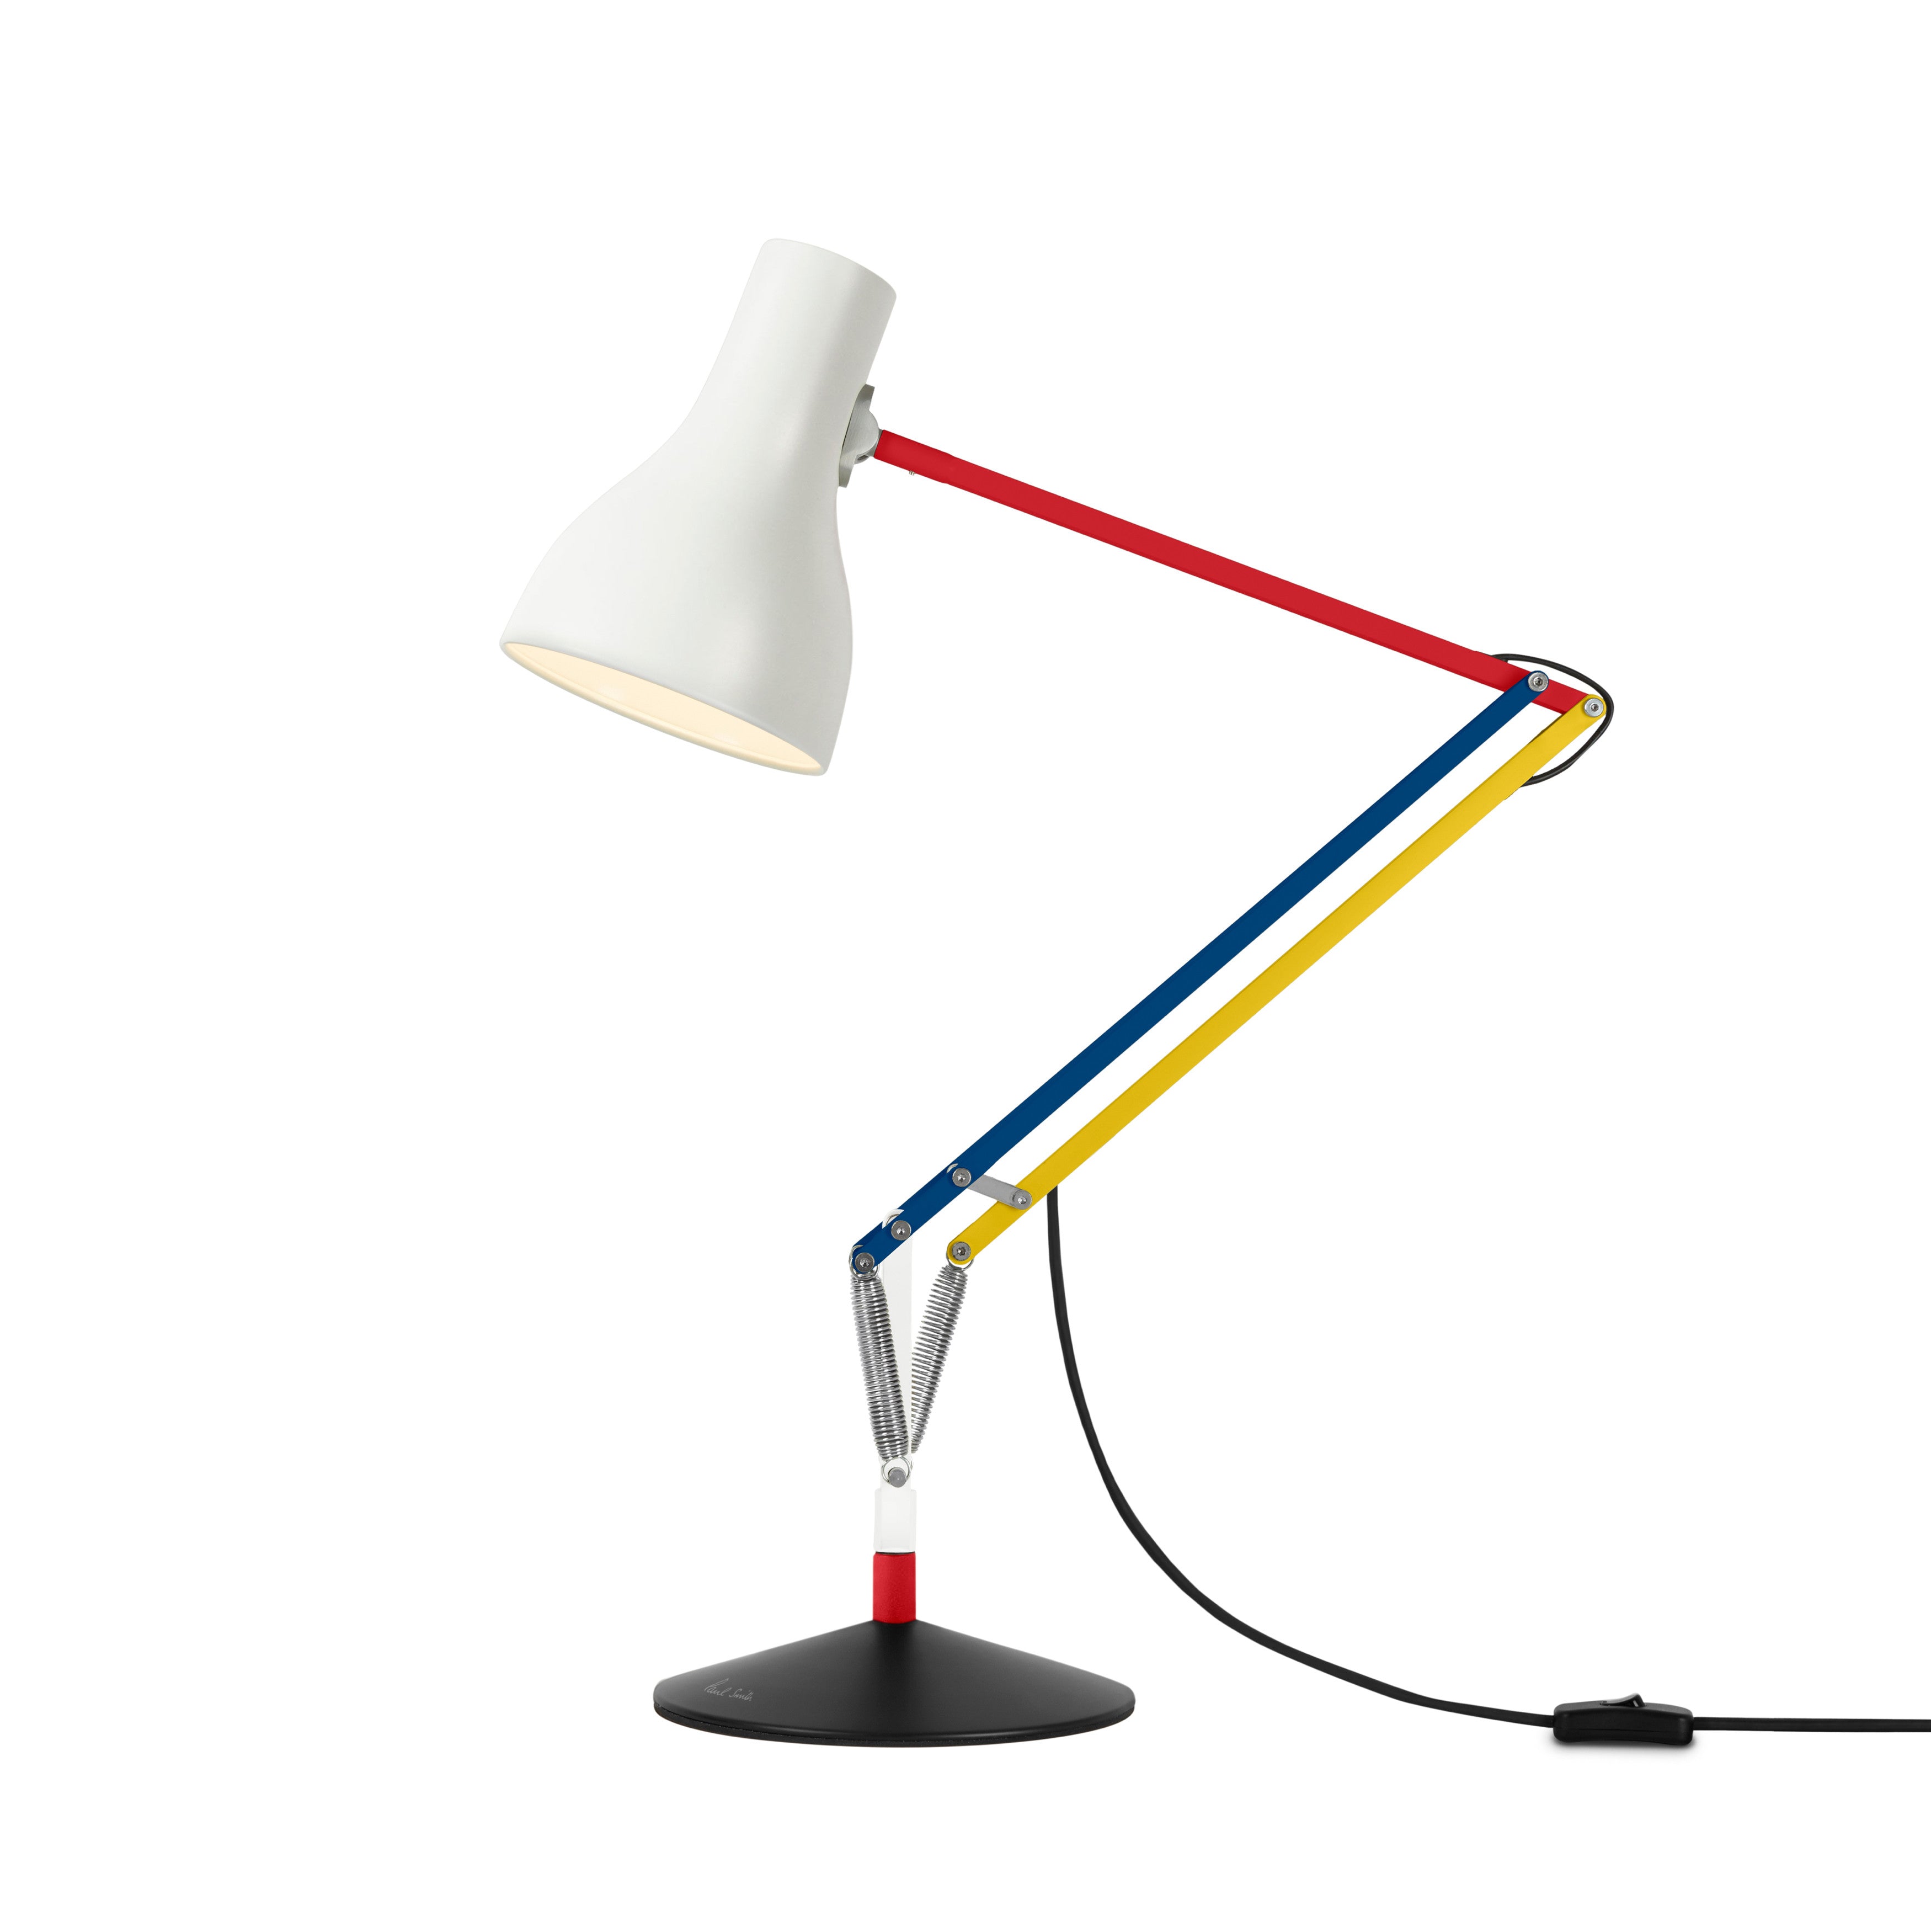 Type 75 Desk Lamp Paul Smith Edition Three by Anglepoise